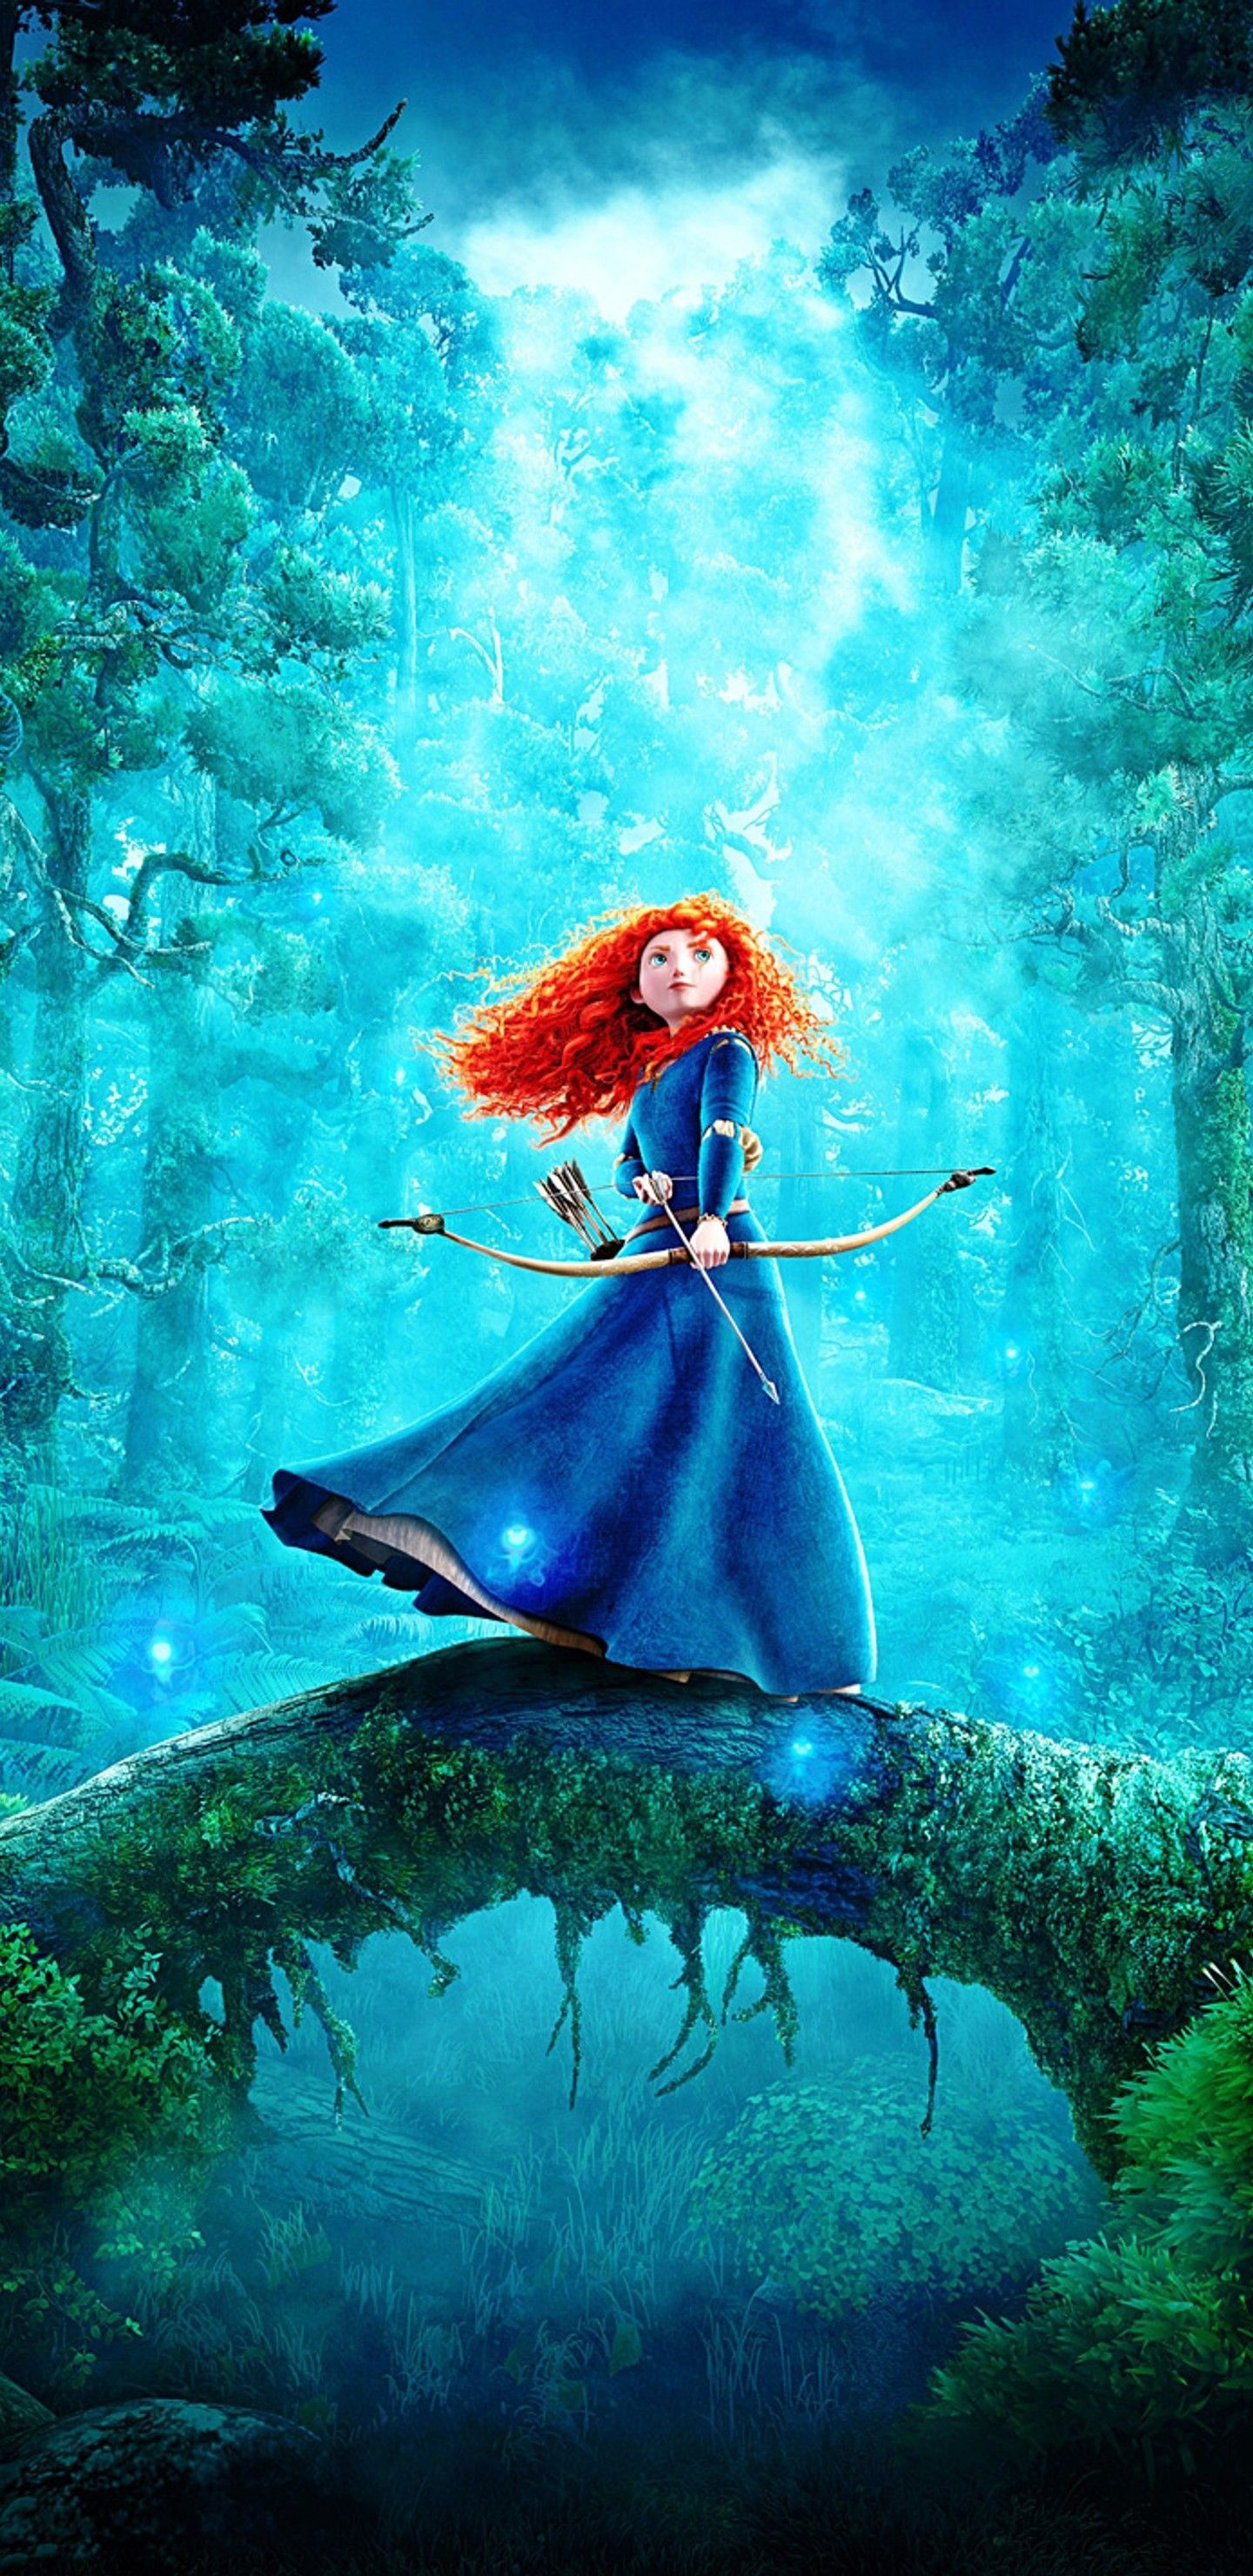 Brave (Disney): The story of Princess Merida of DunBroch, who defies an age-old custom, causing chaos in the kingdom by expressing the desire not to be betrothed. 1440x2960 HD Background.